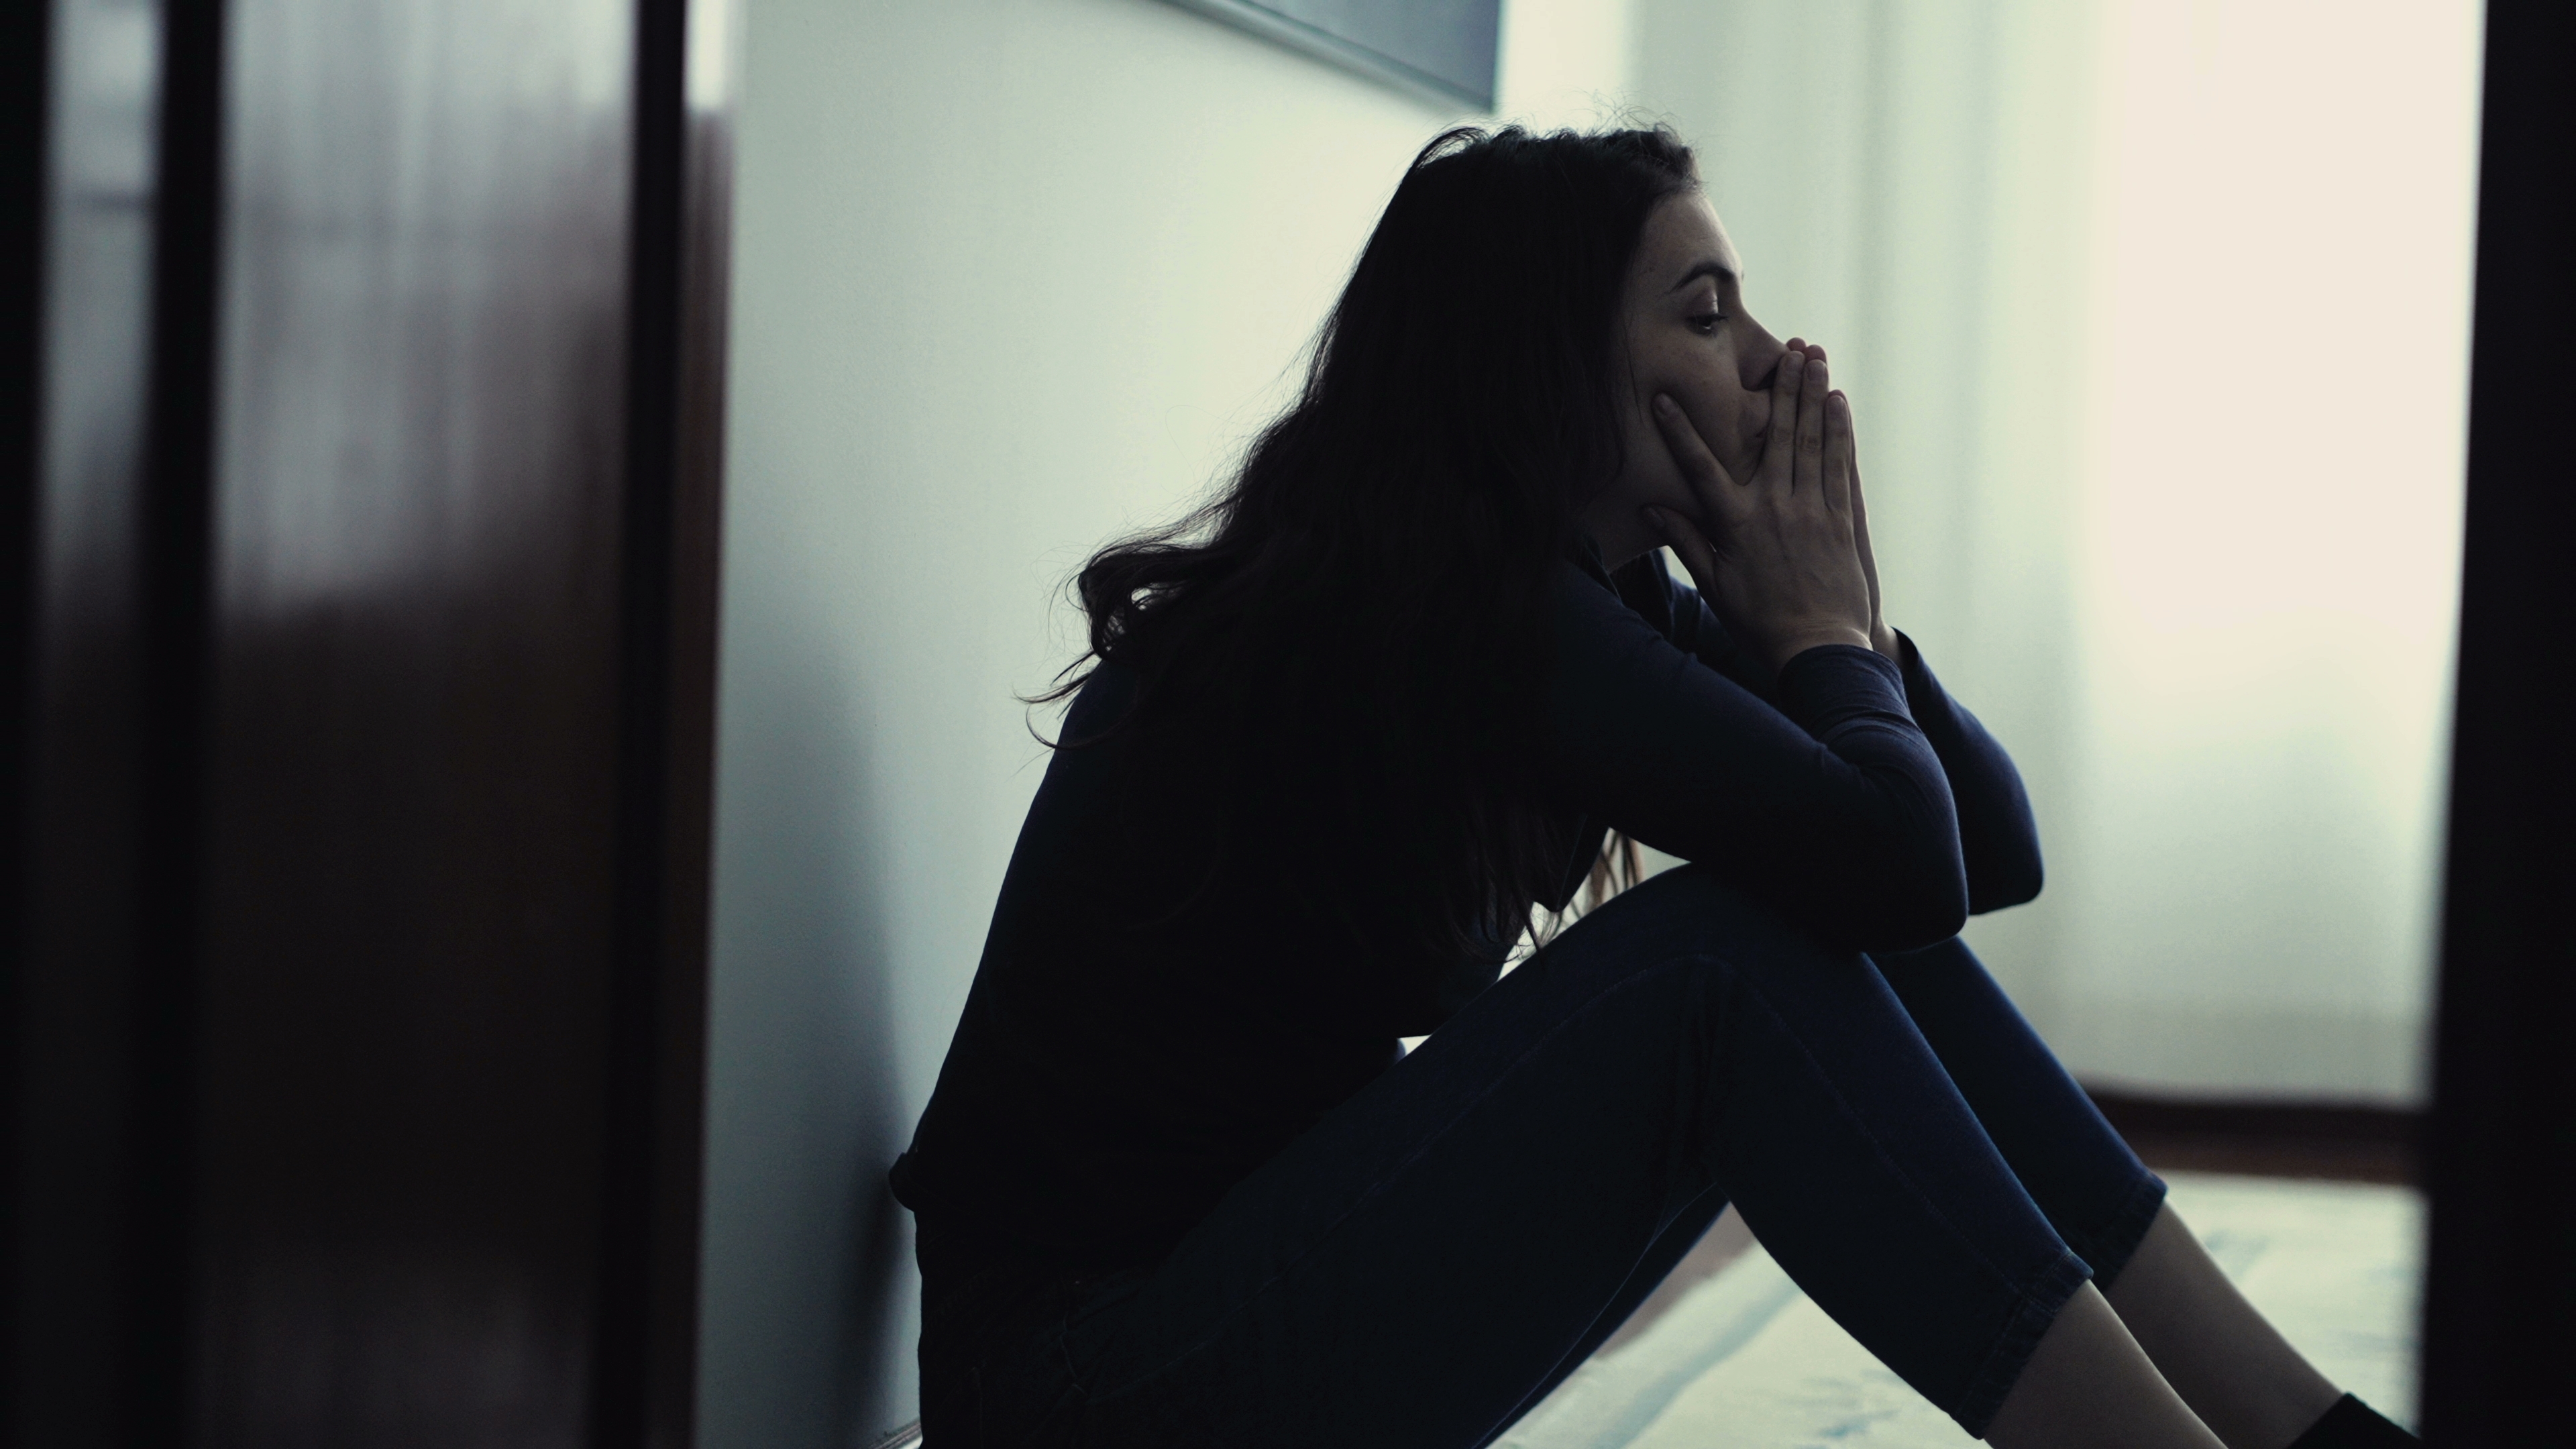 A depressed young woman sitting alone | Source: Shutterstock